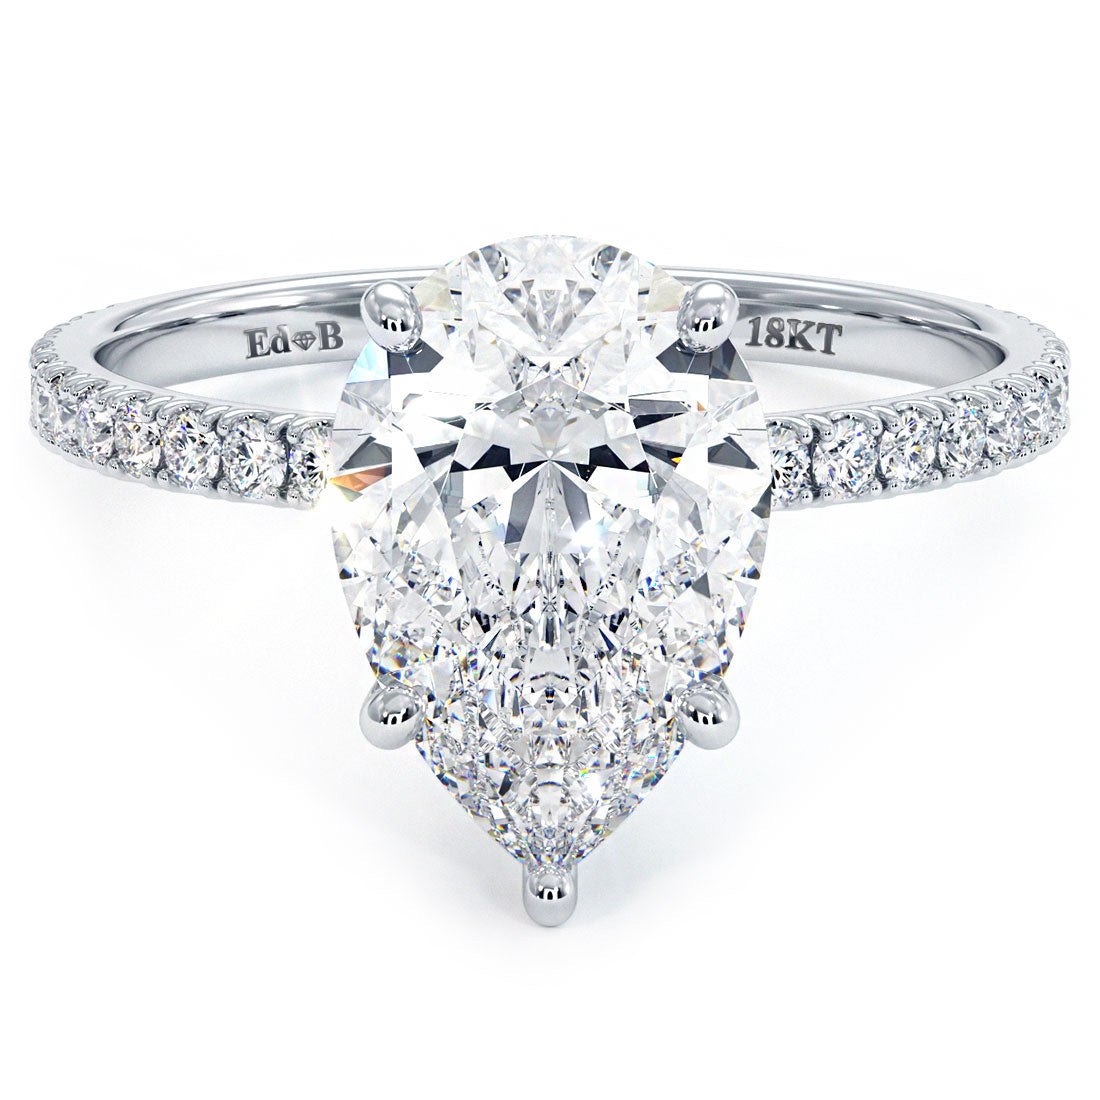 Pear Shape Hidden Halo With V Tip 5 Prongs Micropave Diamond Engagement Ring Setting